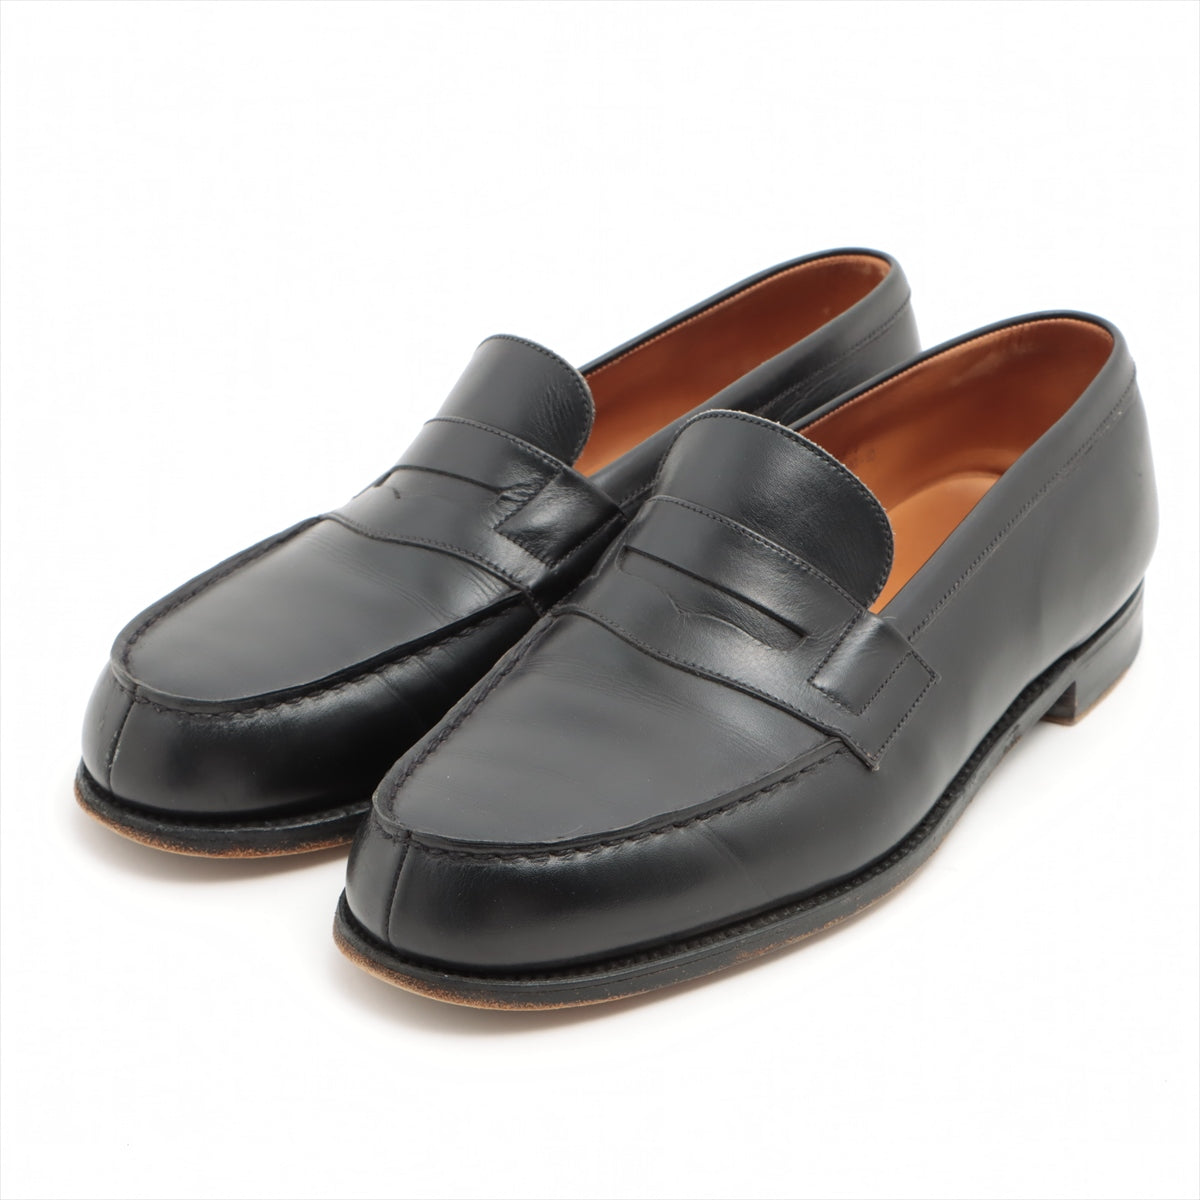 J. M. Weston Leather Loafer 6 1/2E Men's Black 180 signature loafers Genuine shoe tree available